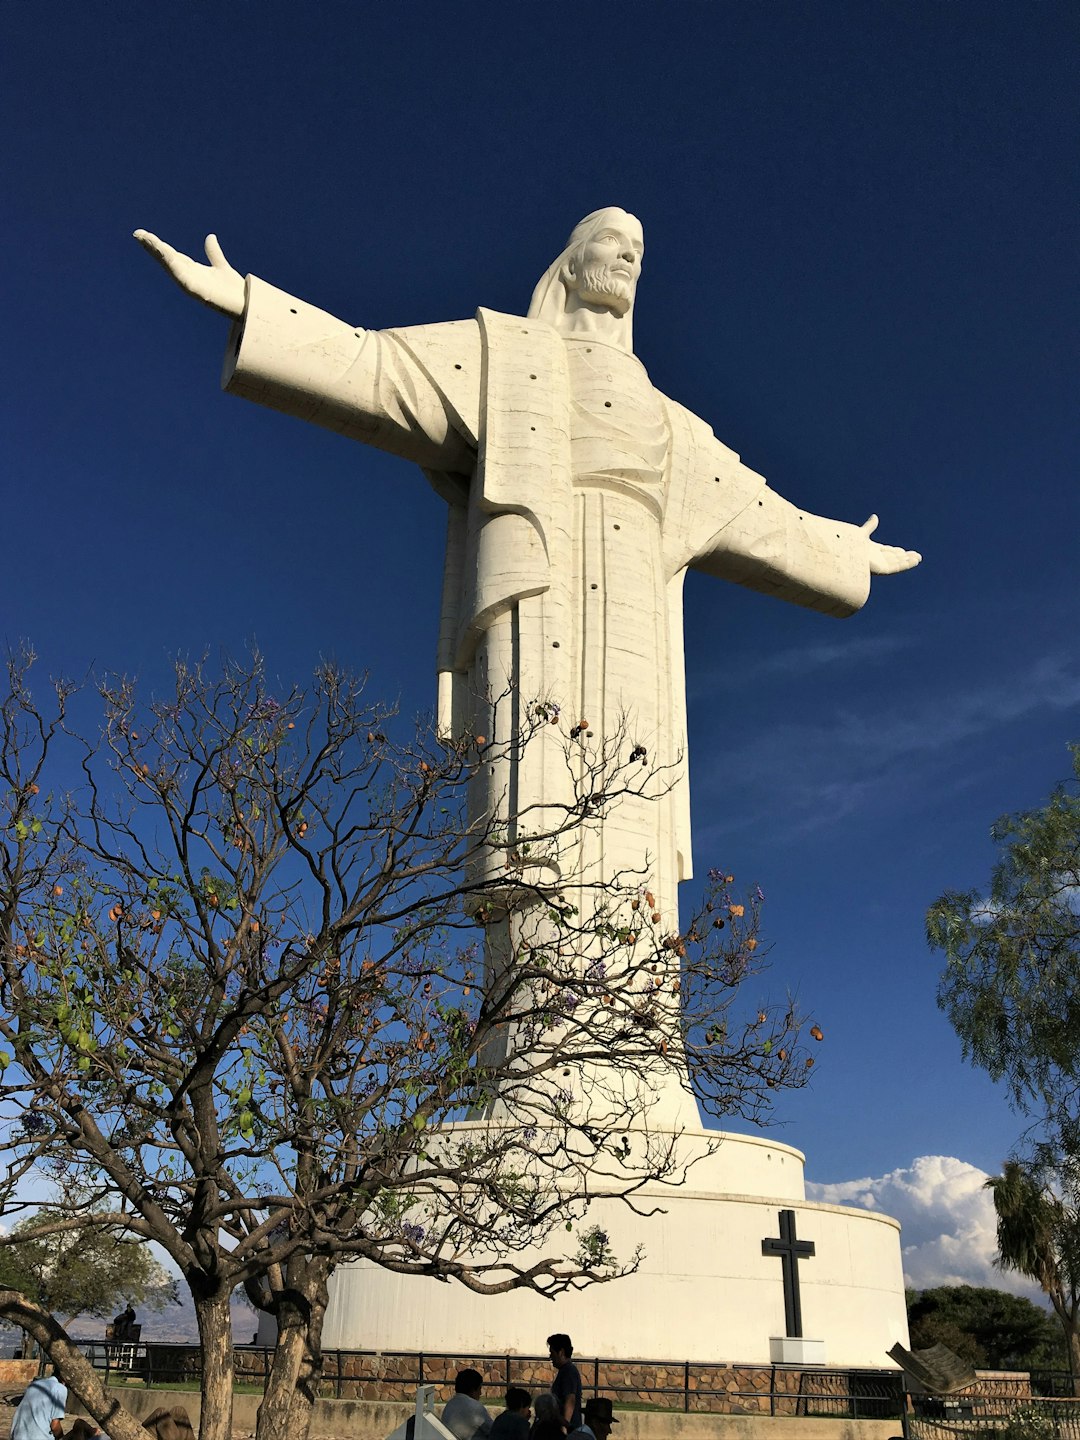 Travel Tips and Stories of Cochabamba in Bolivia